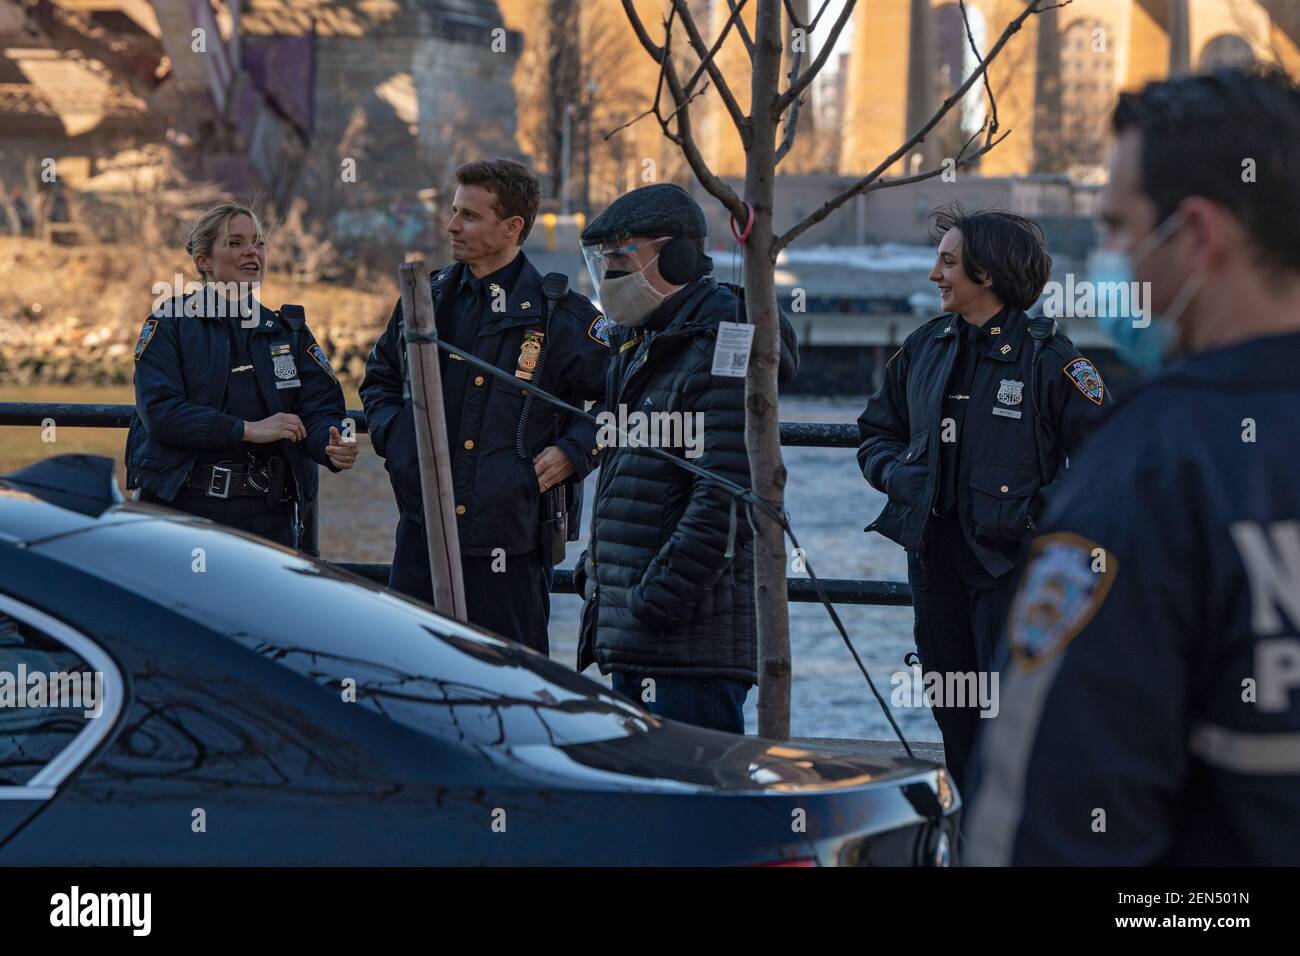 NEW YORK, NY – FEBRUARY 25: Vanessa Ray, Will Estes and Lauren Patten are seen during the filming of the television show 'Blue Bloods' season eleven in Astoria Park on February 25, 2021 in New York City. Credit: Ron Adar/Alamy Live News Stock Photo